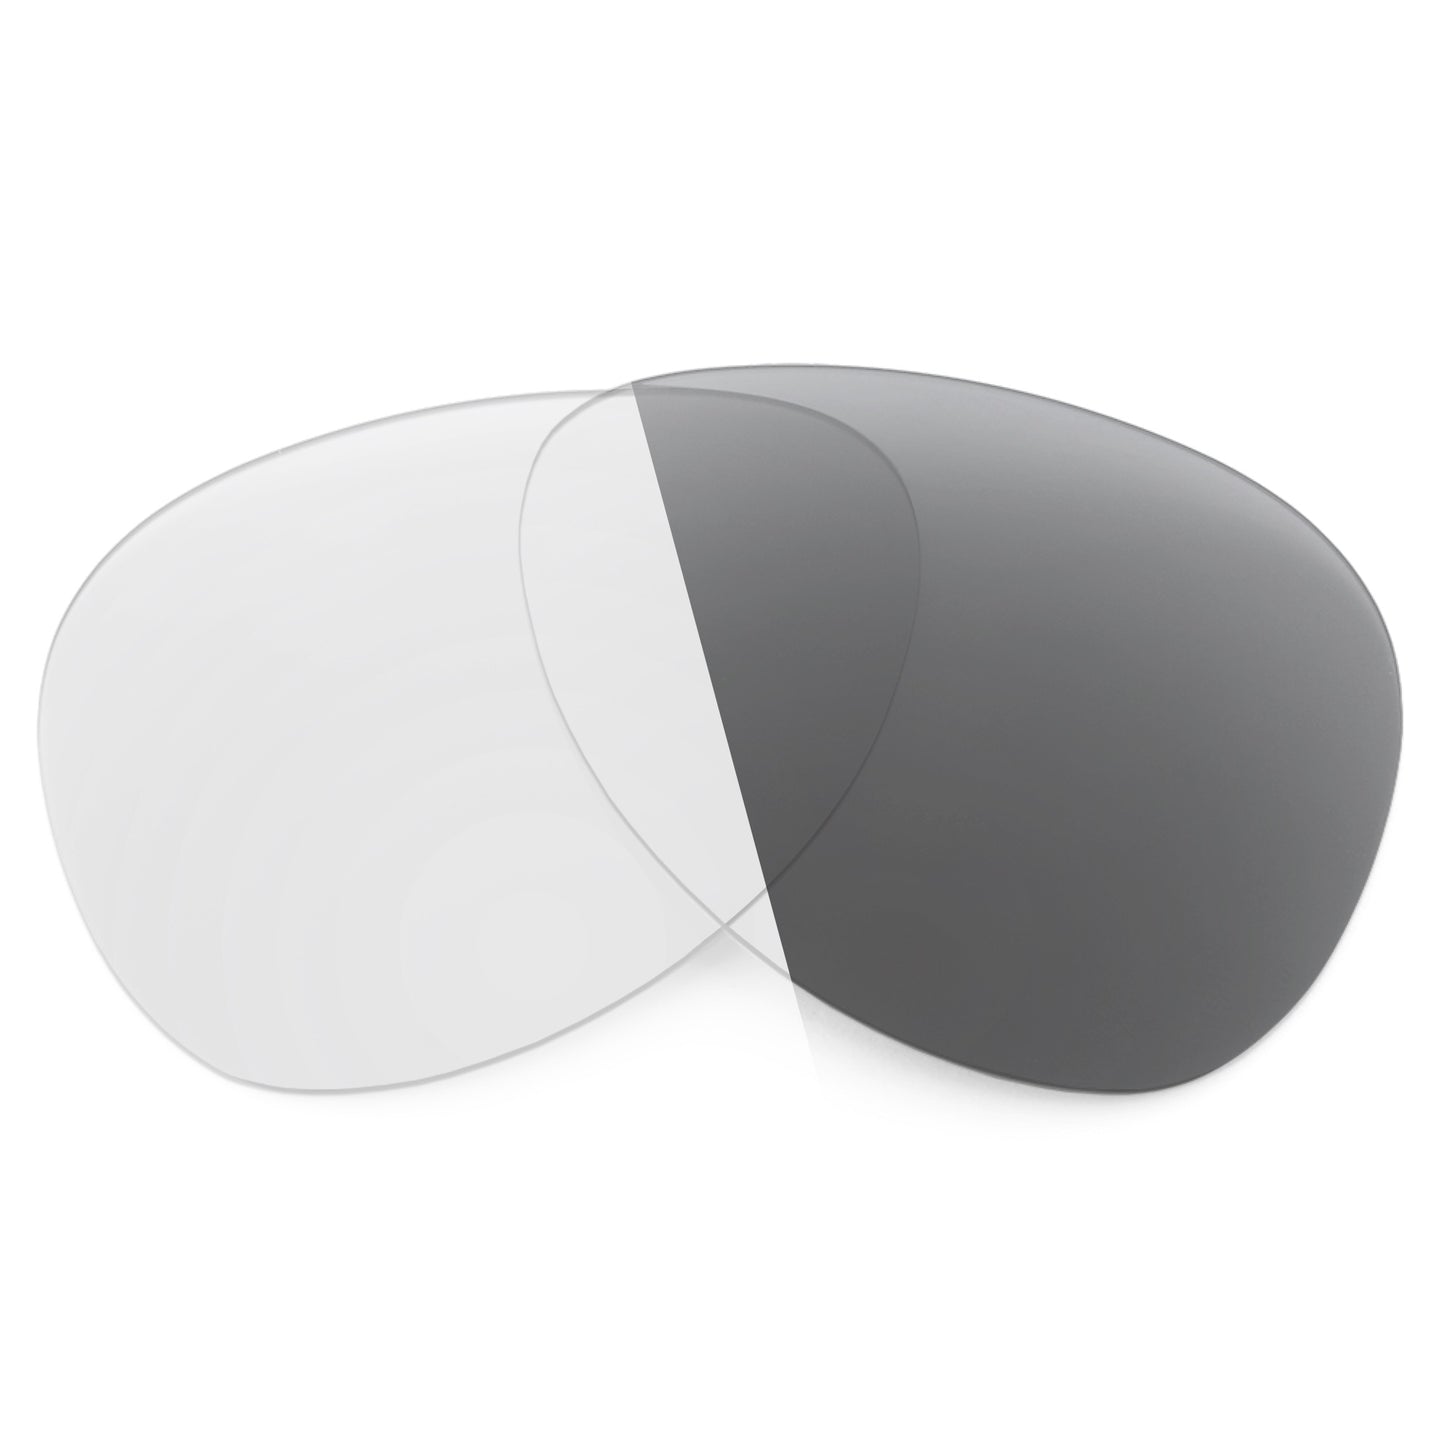 Revant replacement lenses for Costa Cook Non-Polarized Adapt Gray Photochromic